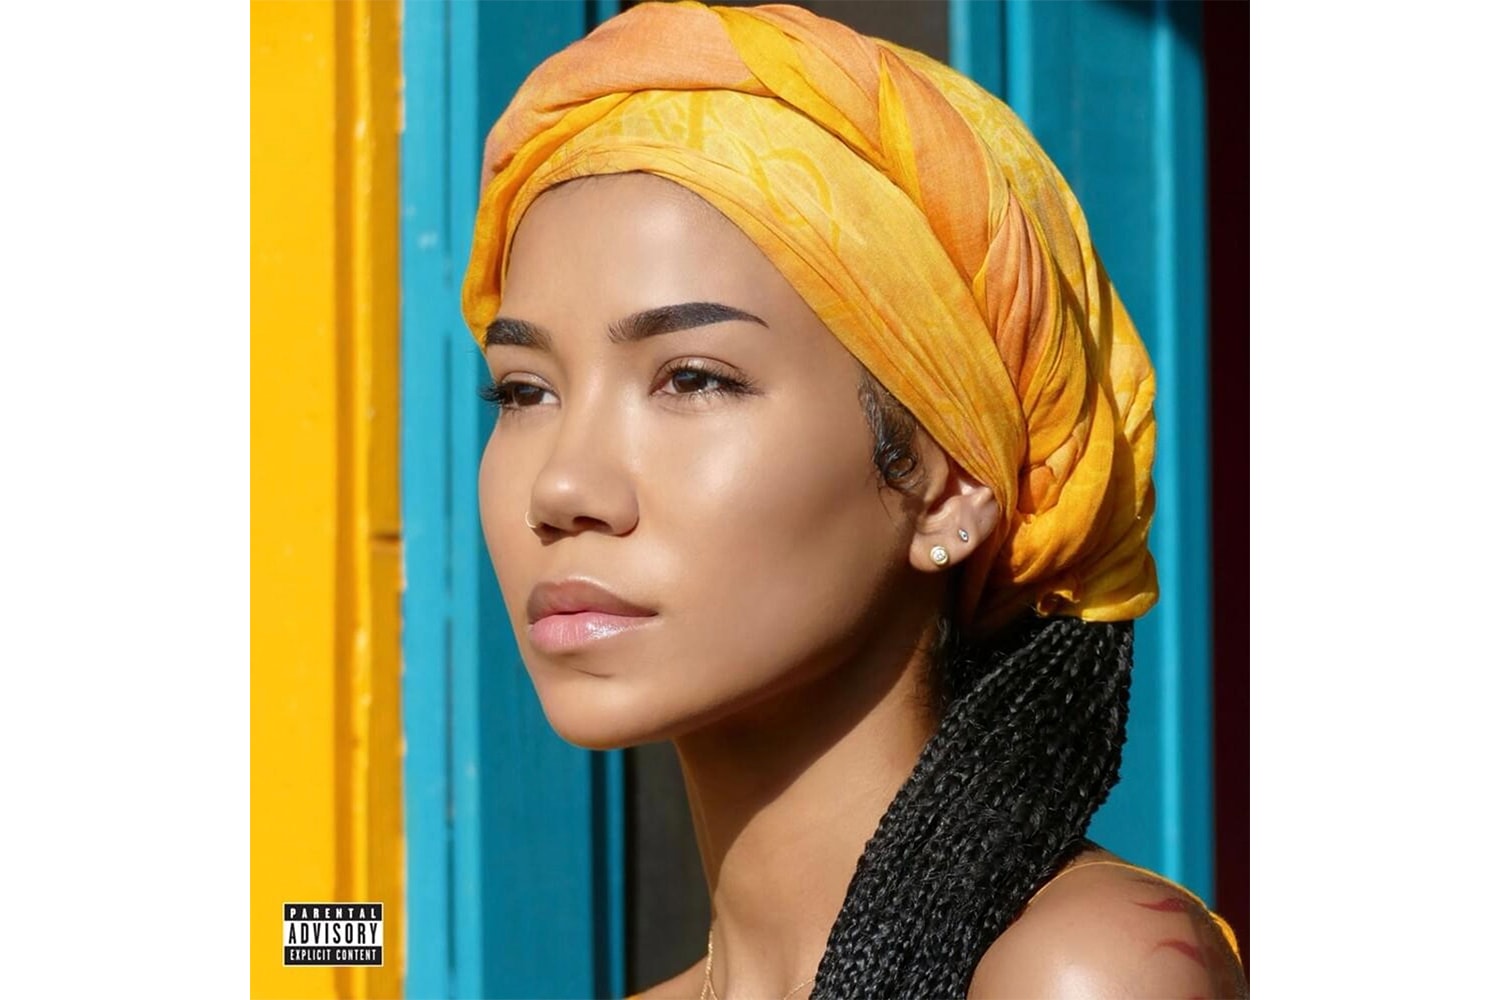 Jhené Aiko 'Chilombo' Album Stream R&B listen now spotify apple music Future, Big Sean, Miguel, Ab-Soul, H.E.R., Nas, John Legend, Ty Dolla $ign, and her father Dr. Chill 